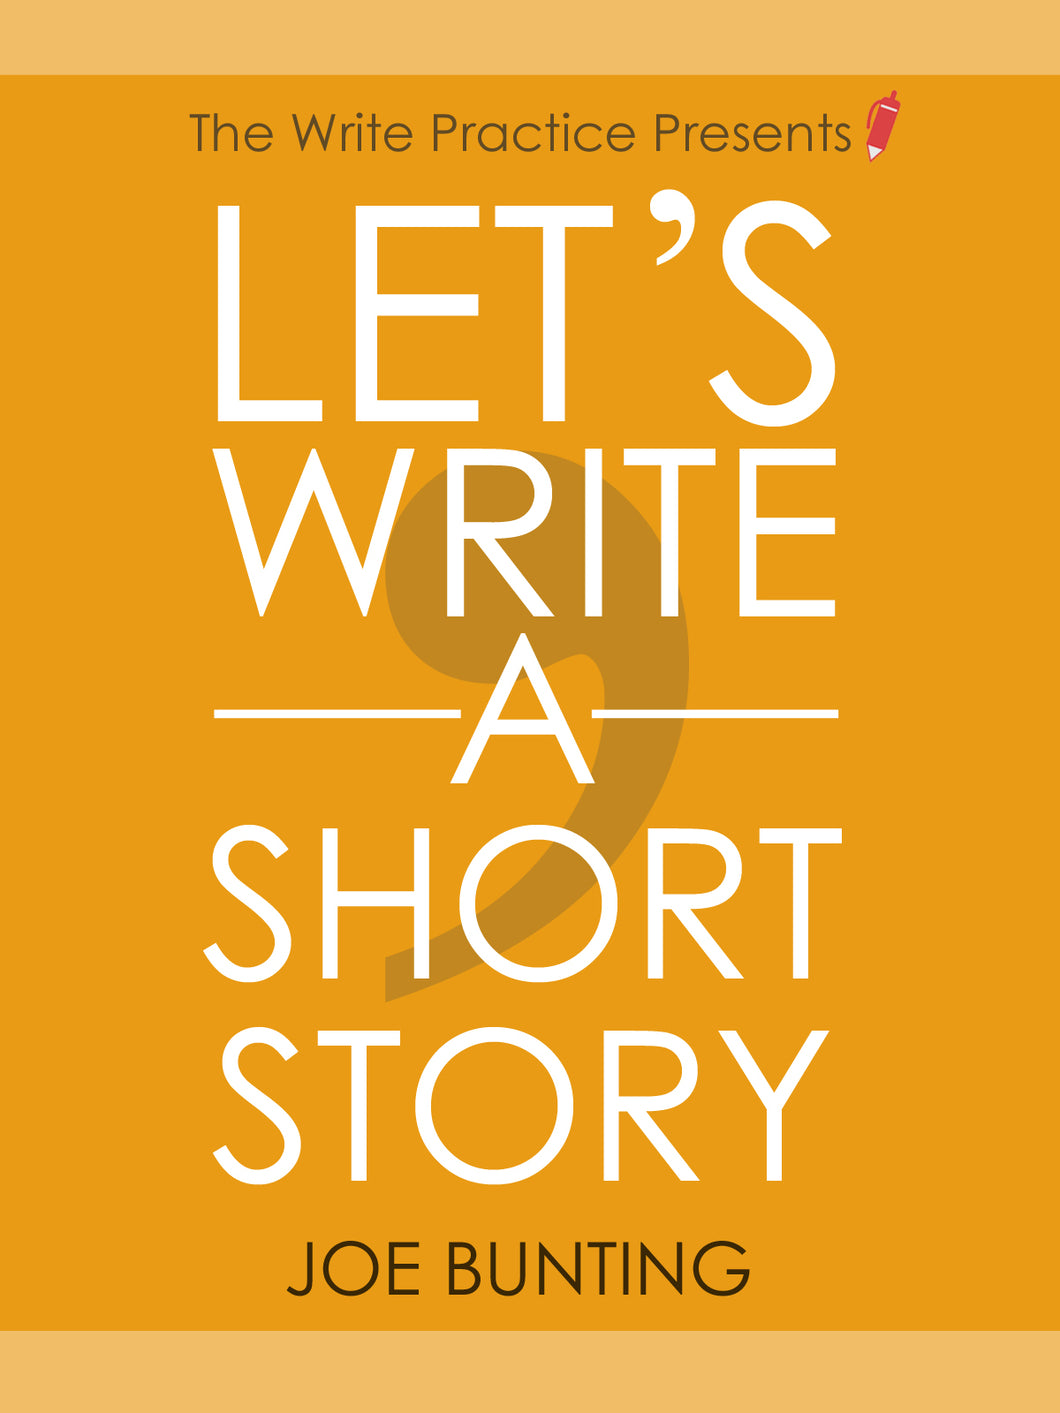 Let's Write a Short Story: How to Write and Publish a Short Story